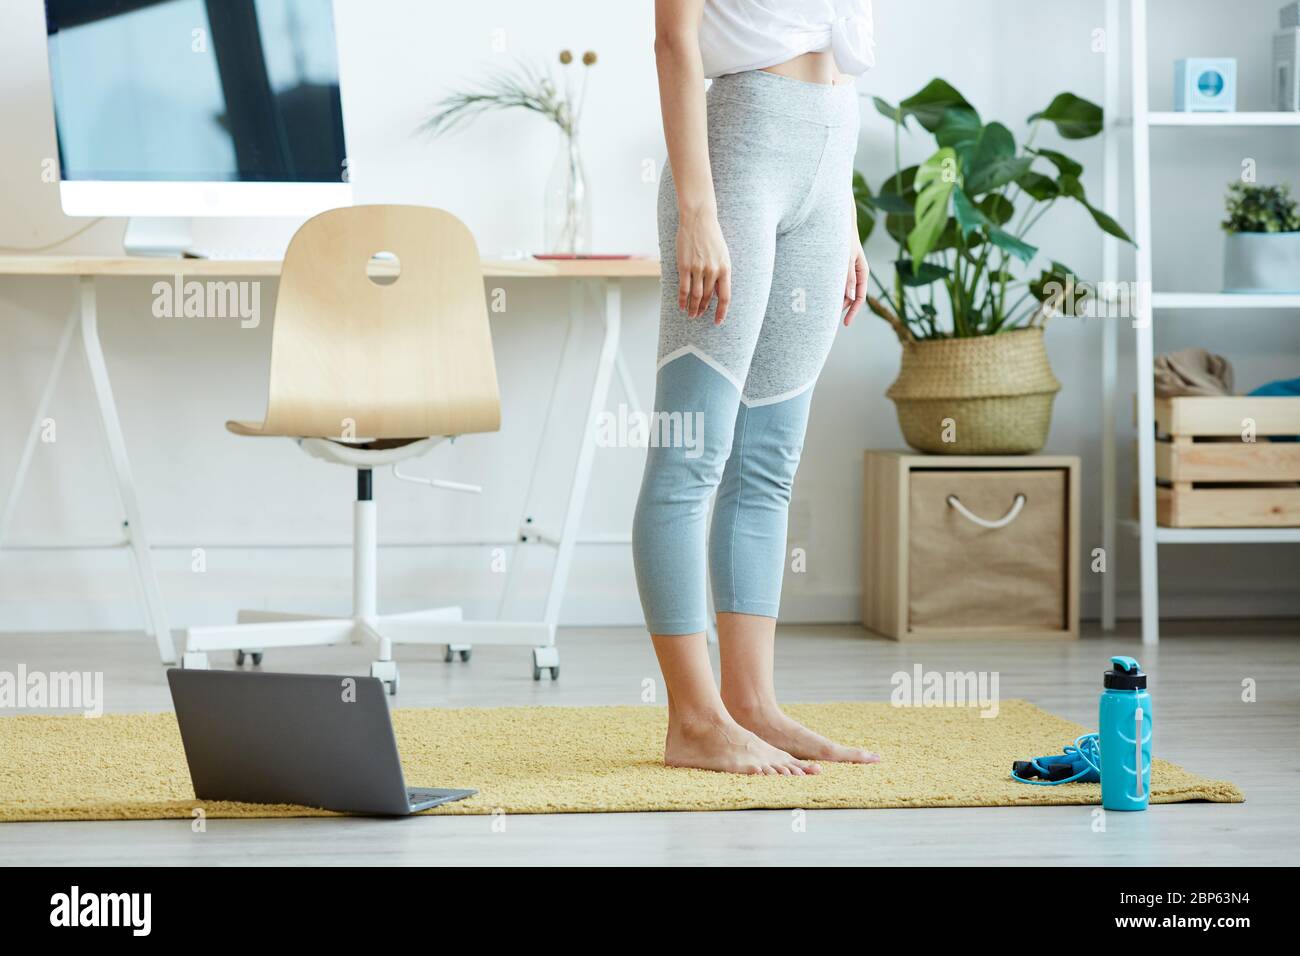 Low section view at unrecognizable woman standing on carpet at home ready for online work out, copy space Stock Photo